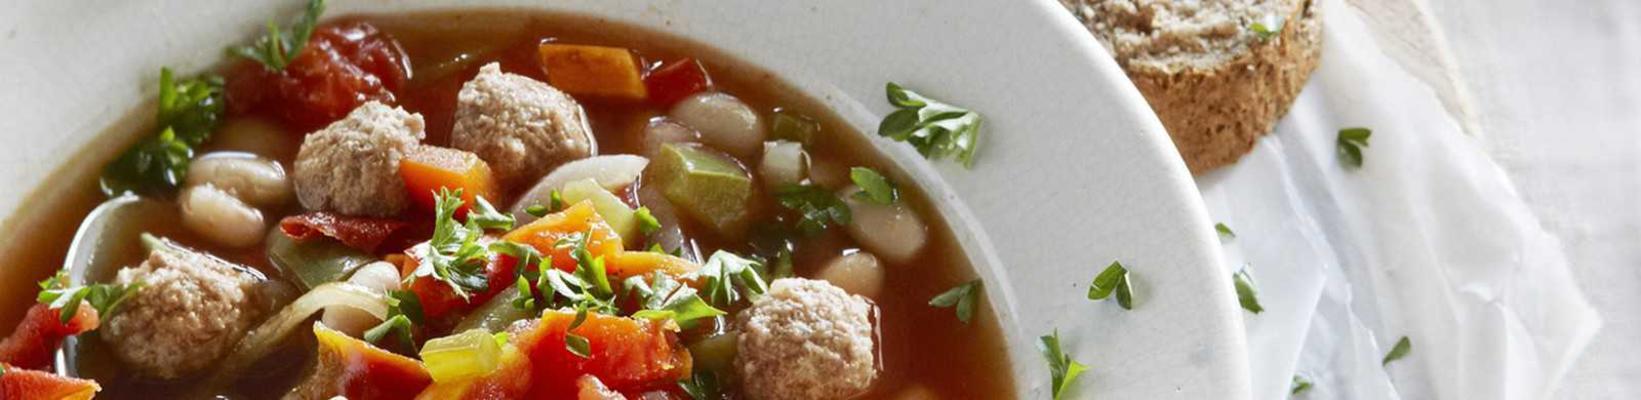 goulash soup with white beans and meatballs